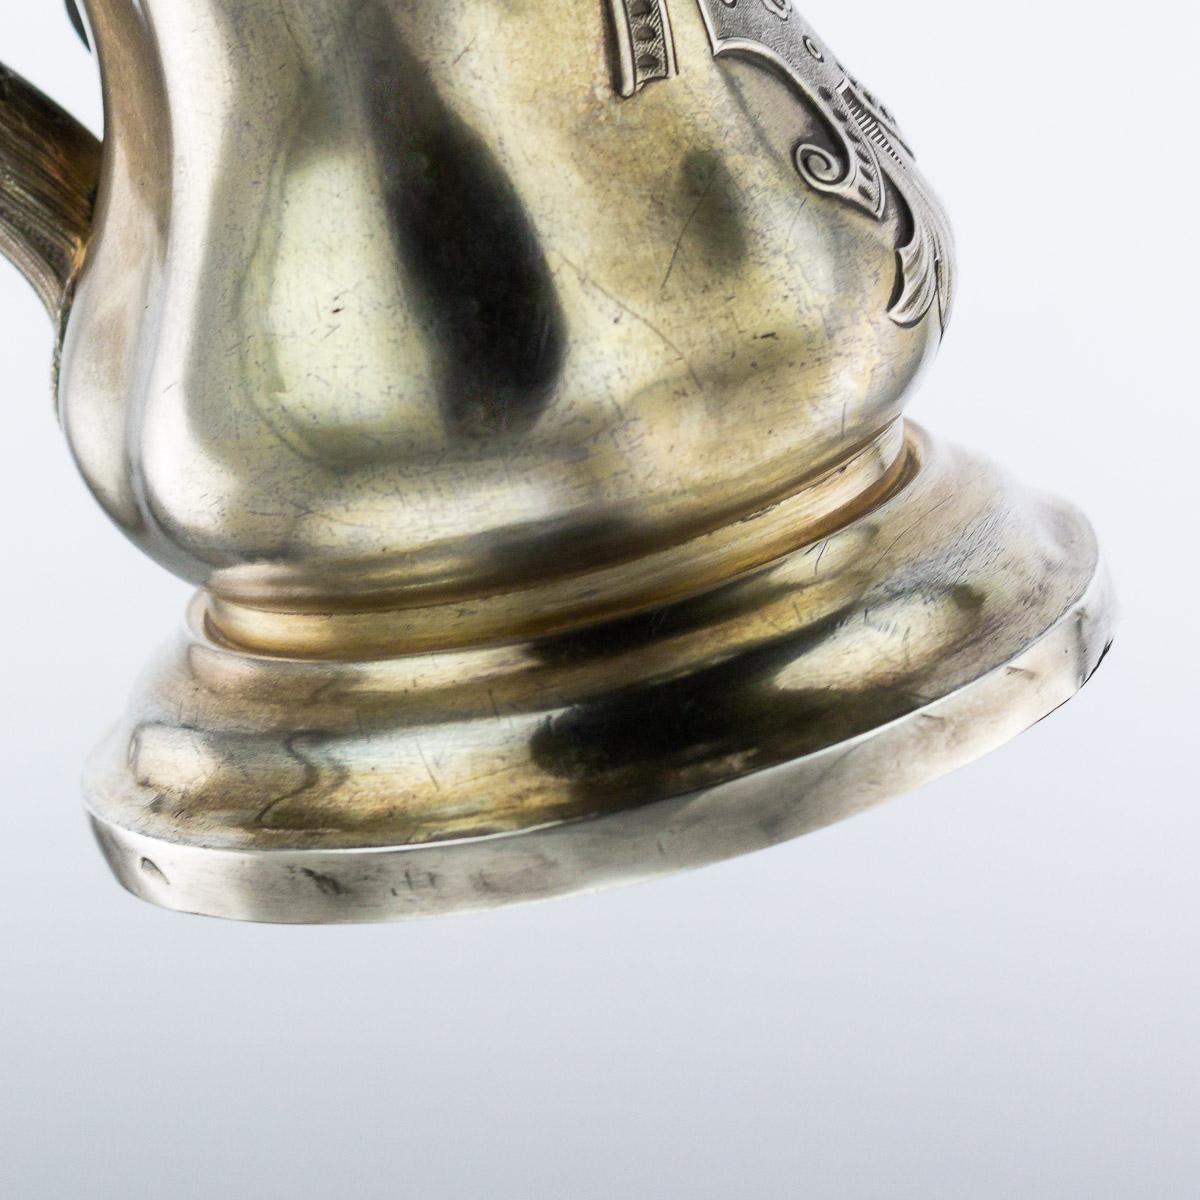 19th Century Russian Empire Solid Silver-Gilt Cup, St-Petersburg, circa 1849 10